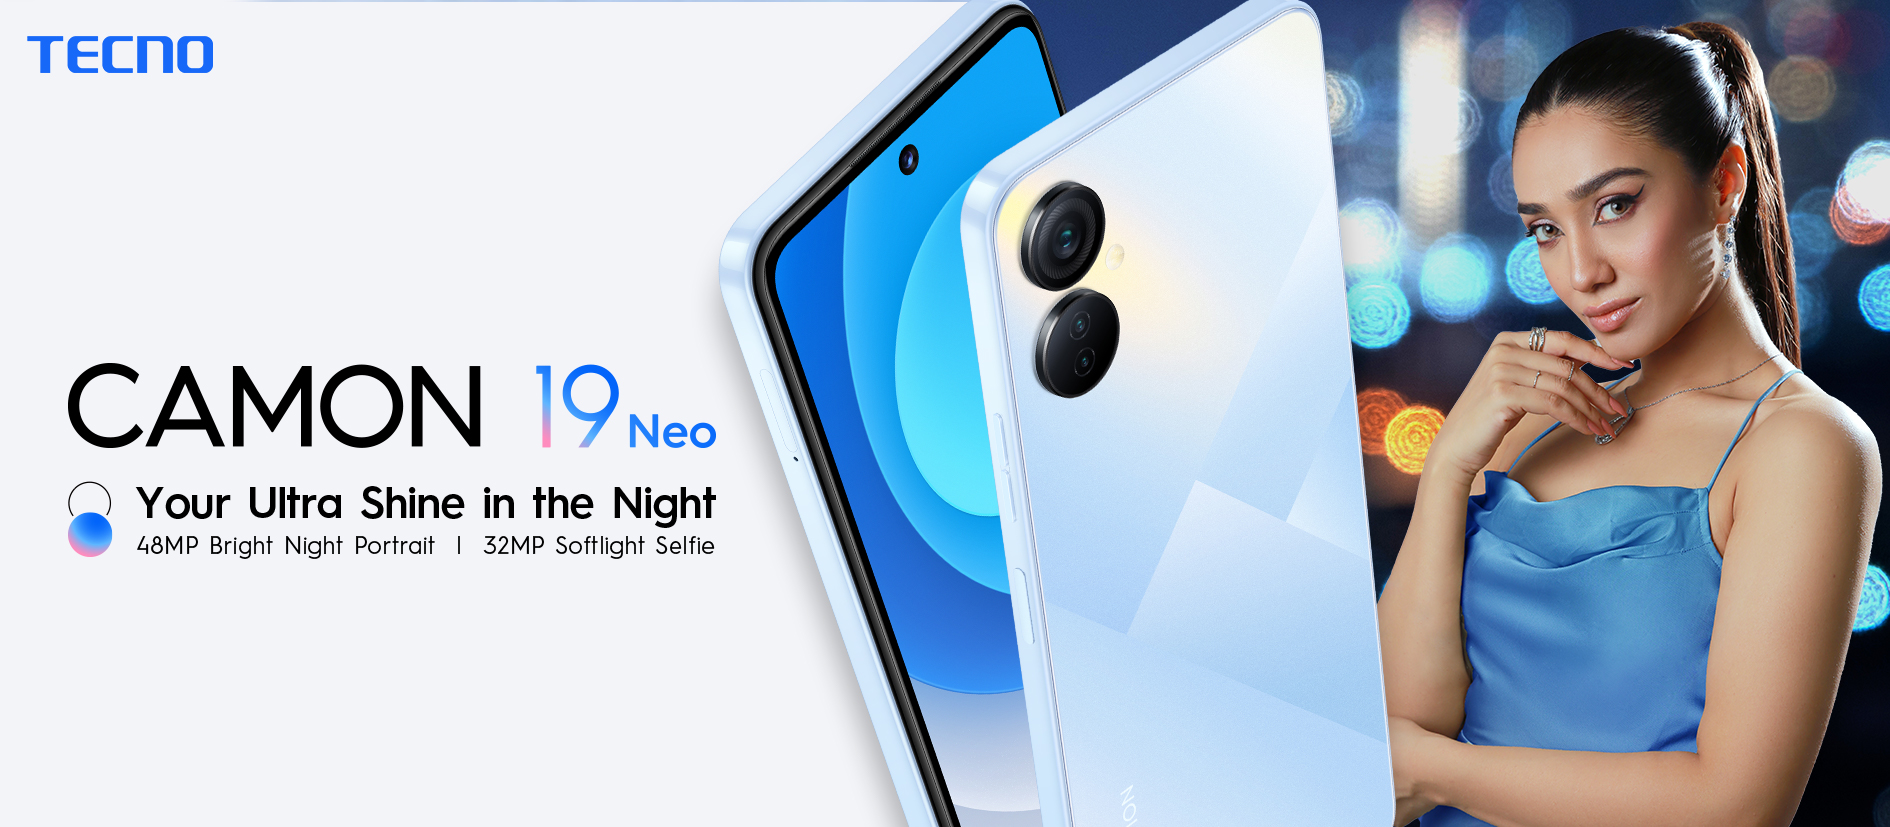 Camon 19 Neo - A must-buy Smartphone with all that you need